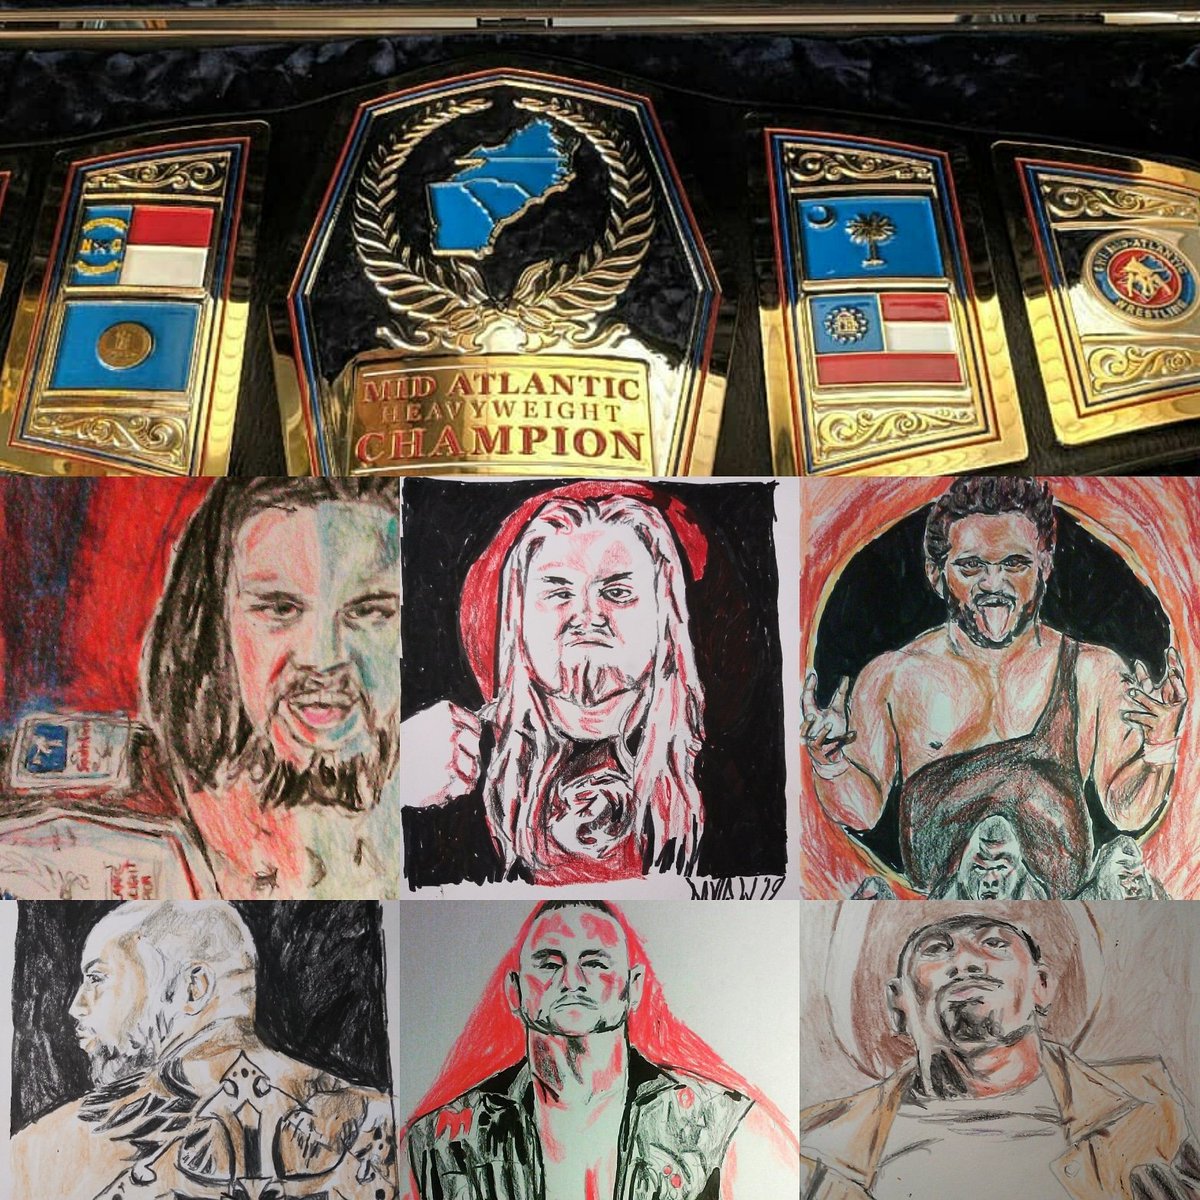 Championship Time!!##6PackChallenge
Let's sink in 
shall we see an new champion tonight? #CWFStronger